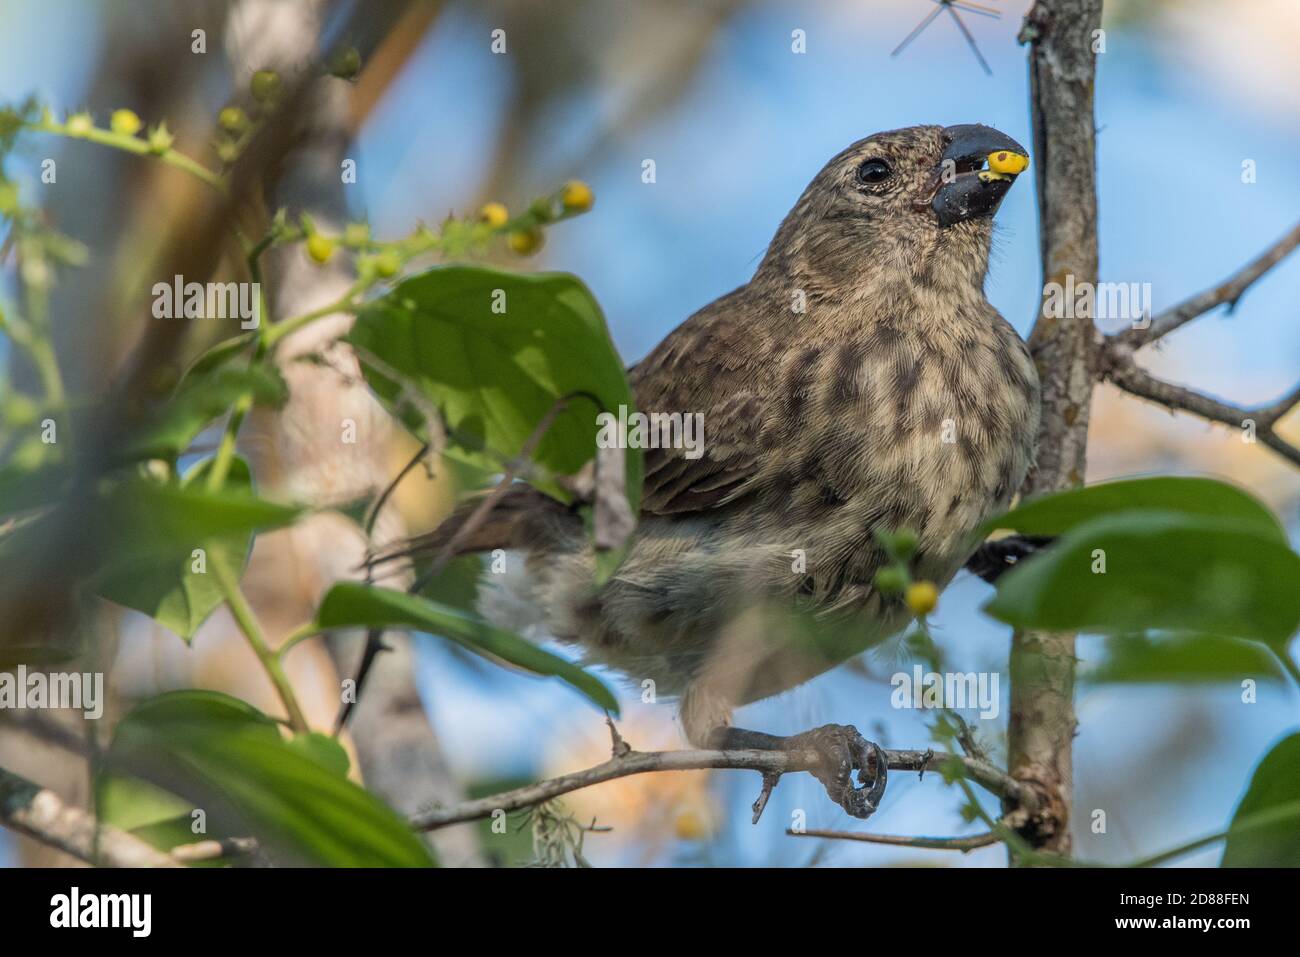 The large tree finch (Camarhynchus psittacula) one of Darwin's finches from the Galapagos islands feeding on seeds. Stock Photo